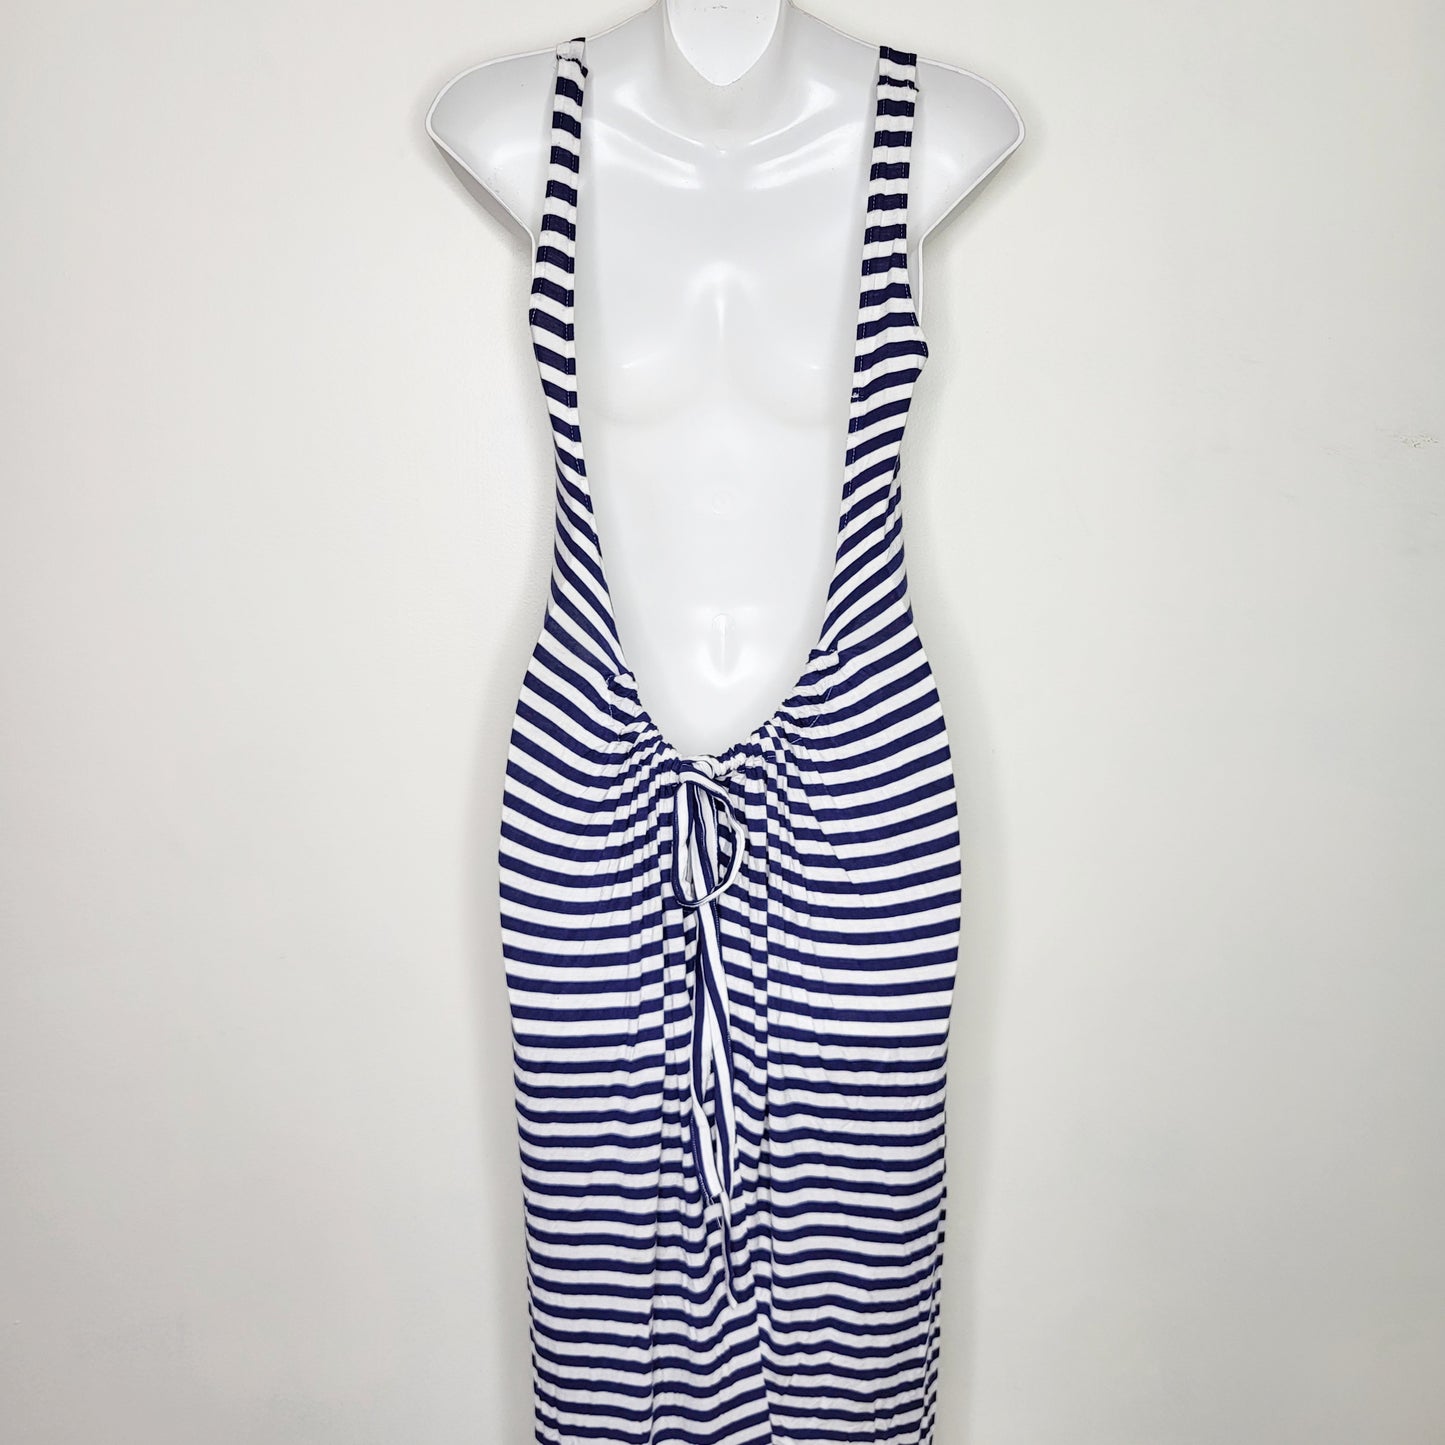 CSWRTZ1 - O'neill navy striped maxi dress with scoop back, size medium, good condition